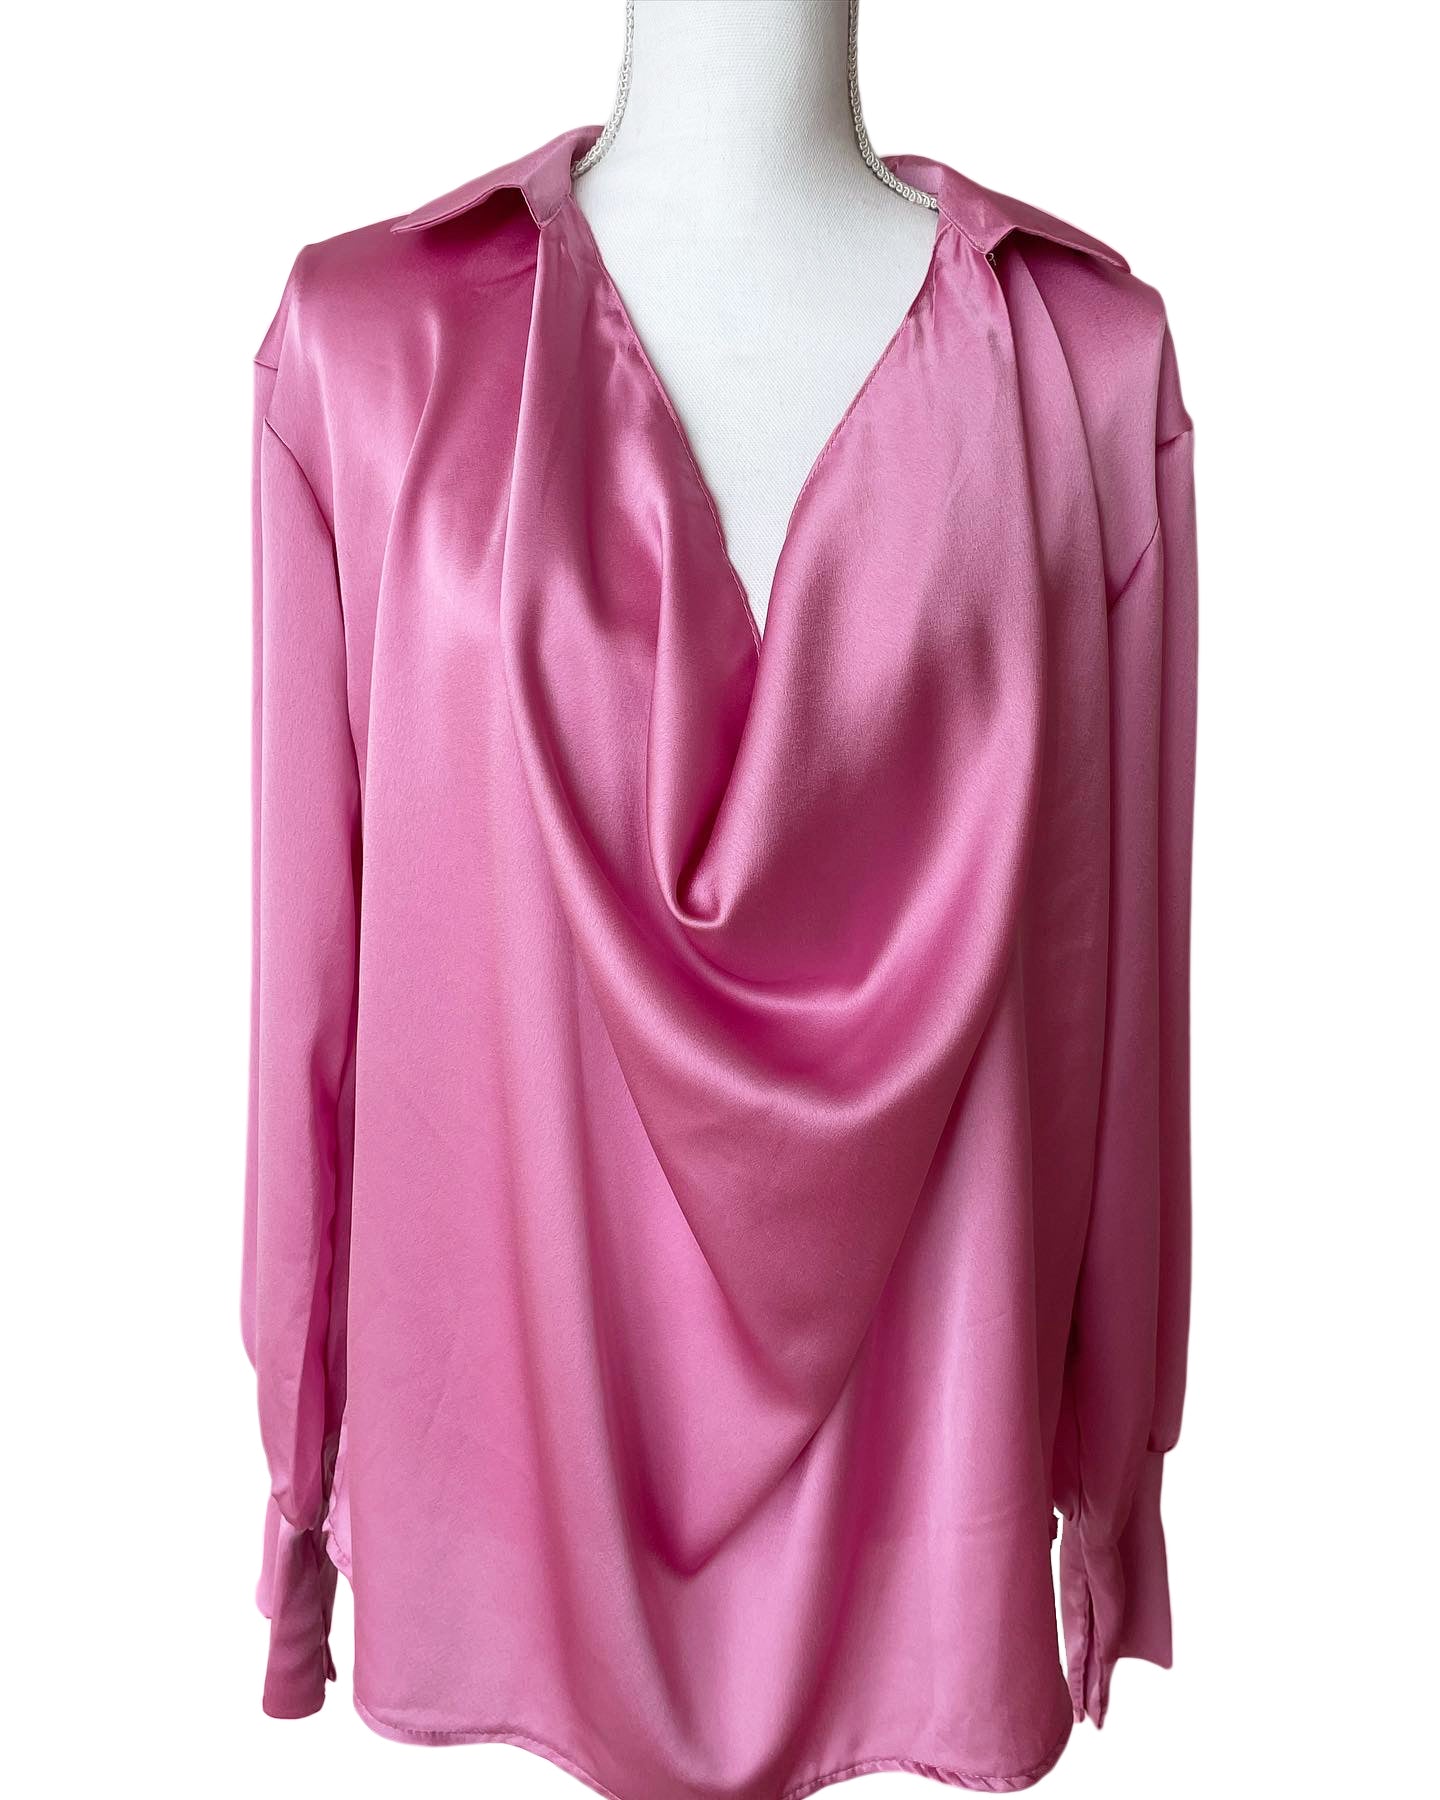 Satin Cowl Neck Blouse in Pink